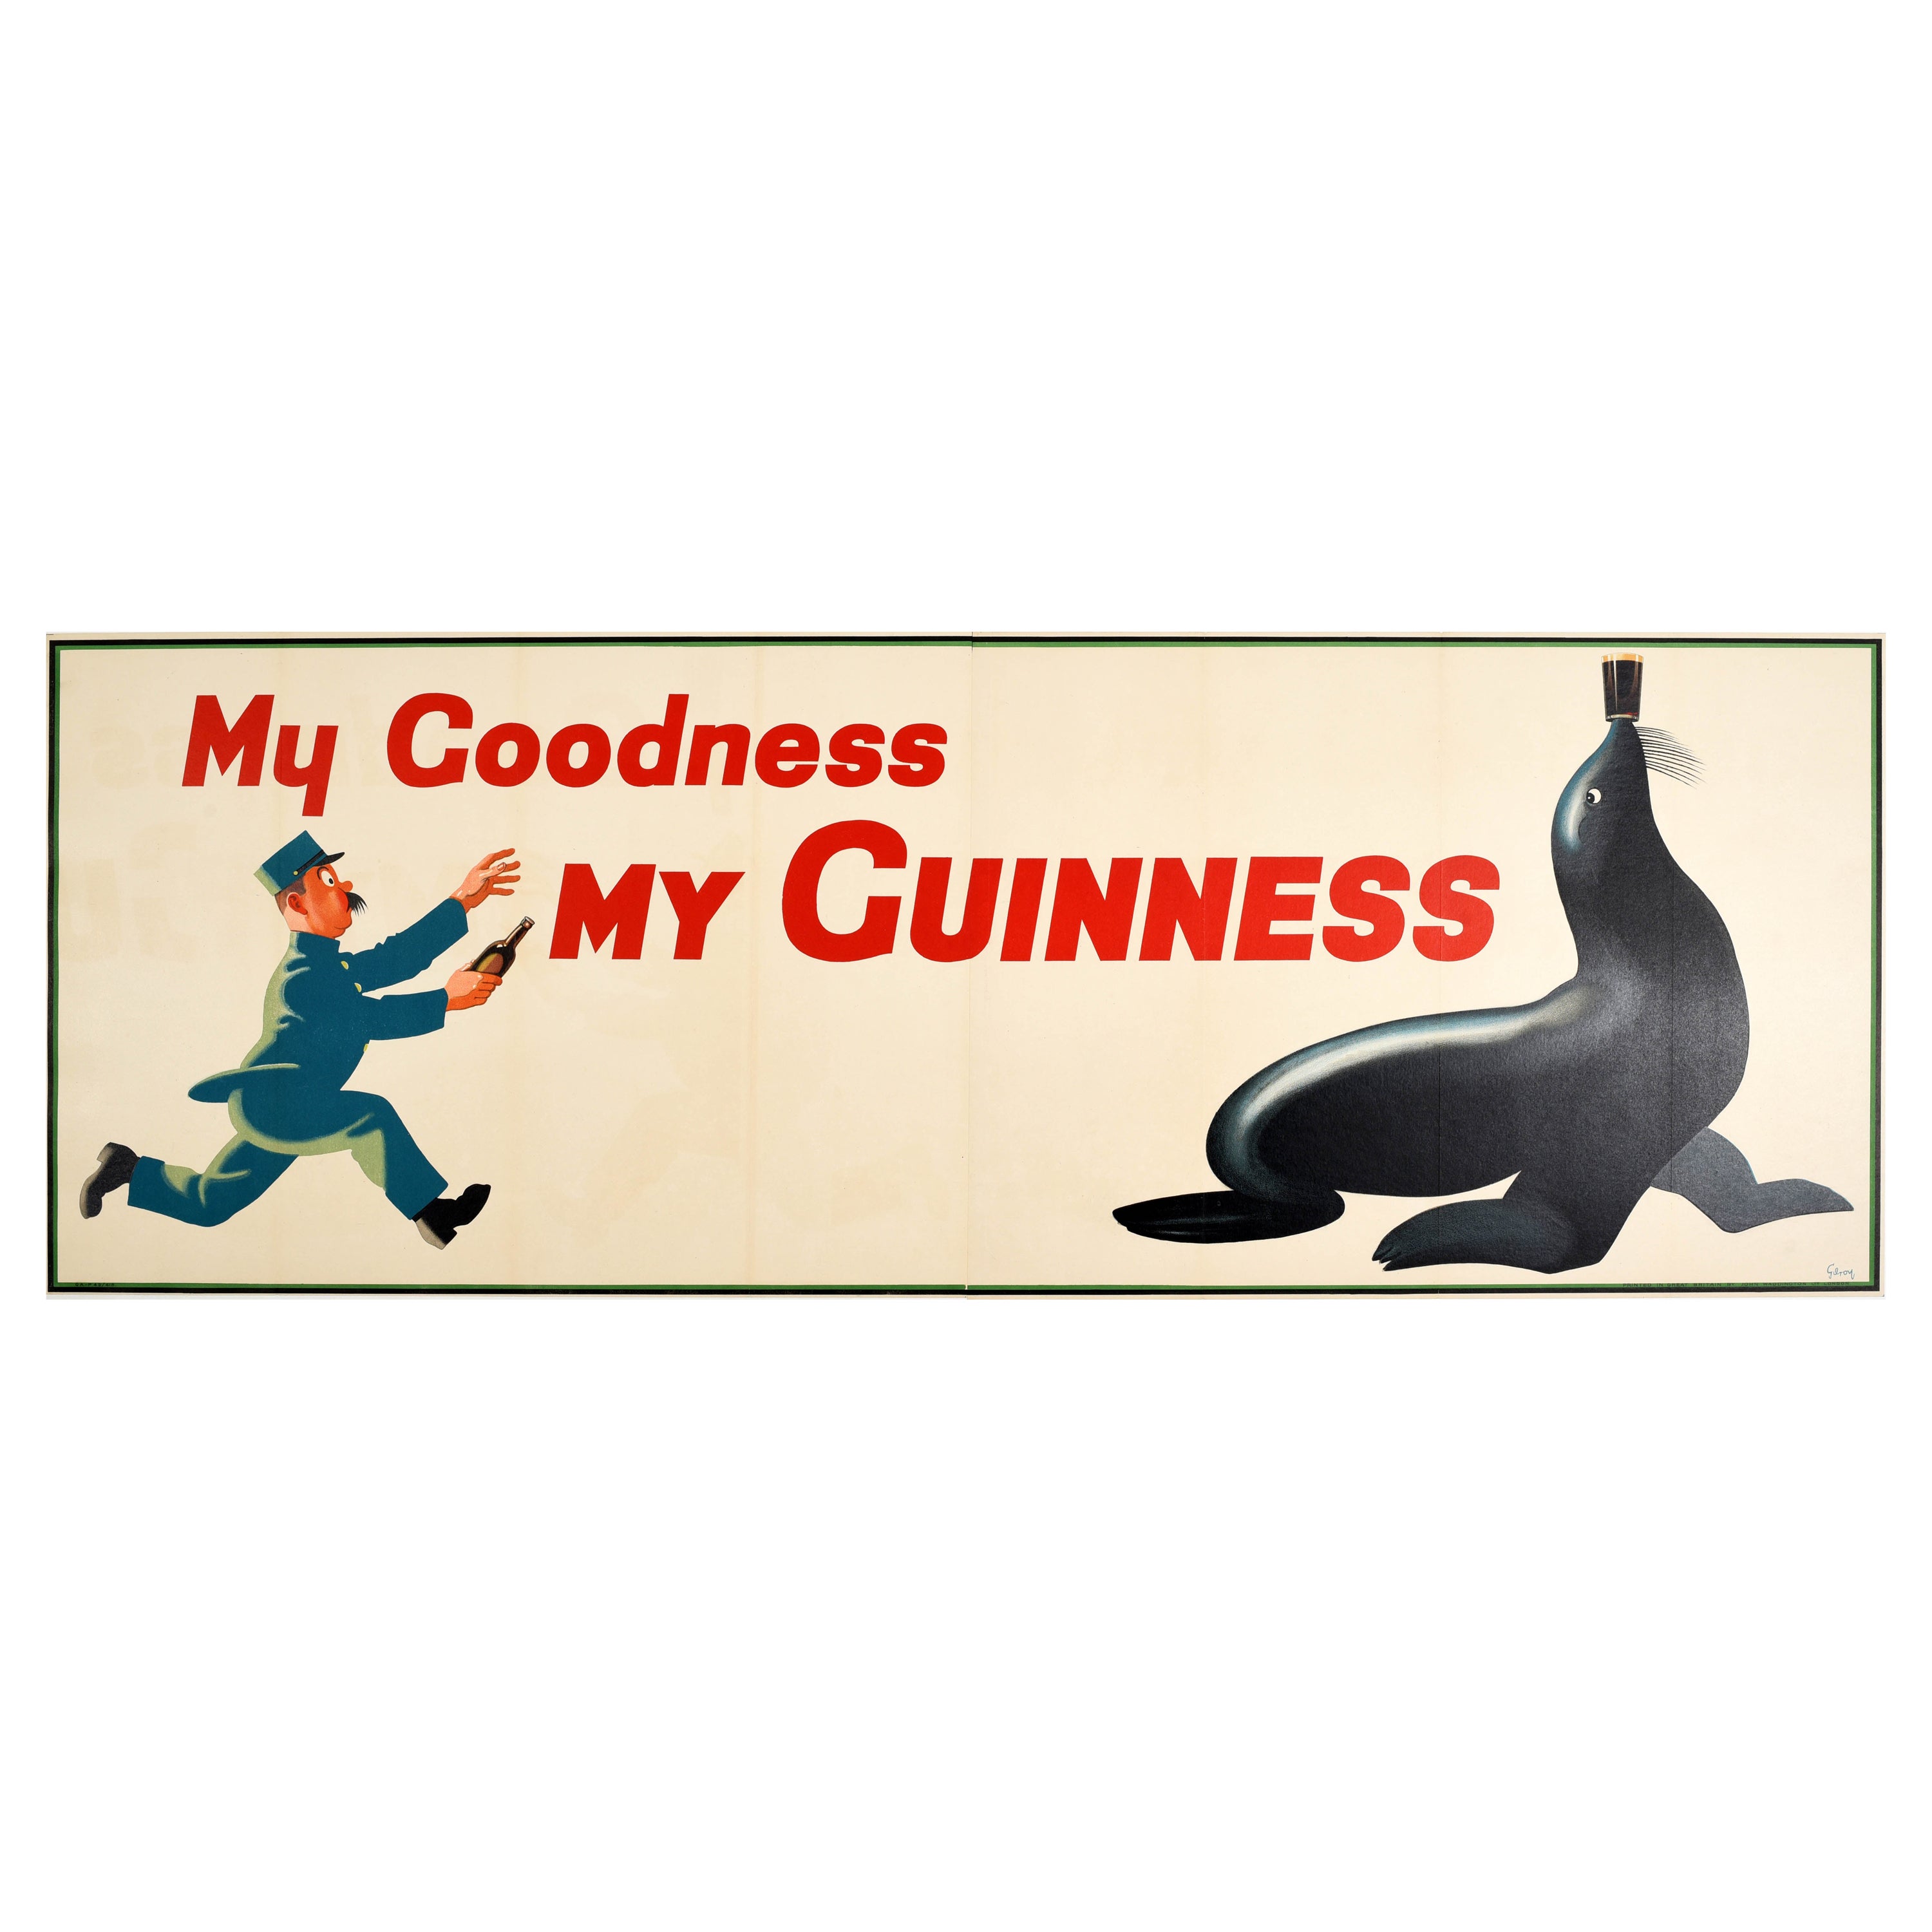 Guinness Beer My Goodness Lion Beer Advertisement Poster Print 